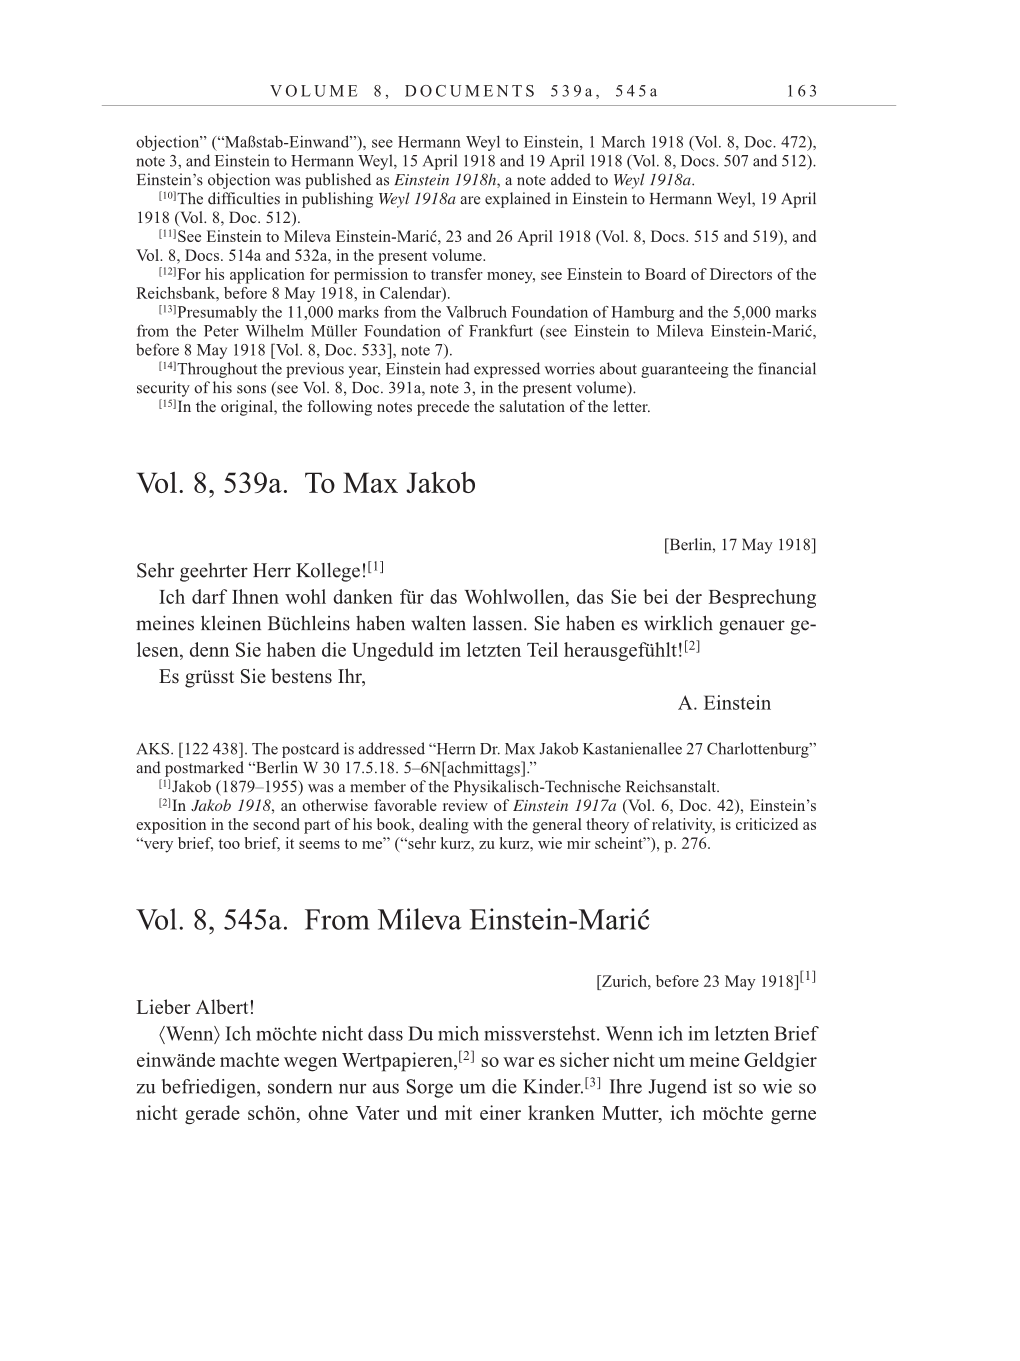 Volume 10: The Berlin Years: Correspondence May-December 1920 / Supplementary Correspondence 1909-1920 page 163